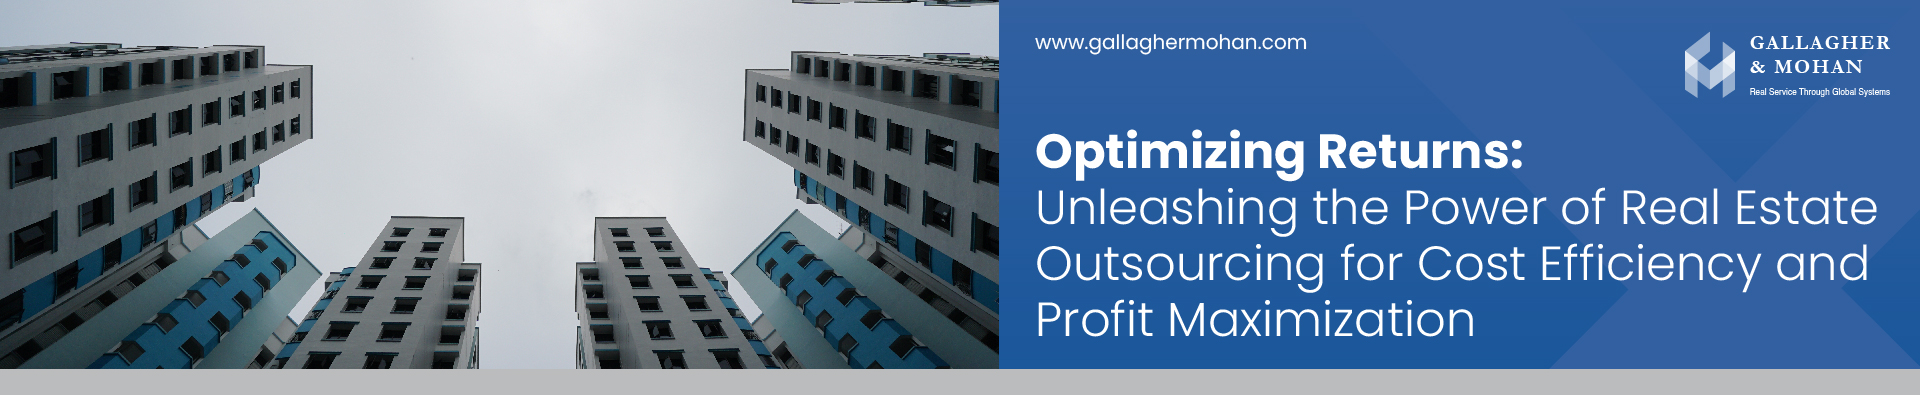 Optimizing Returns Unleashing The Power Of Real Estate Outsourcing For Cost Efficiency And Profit Maximization